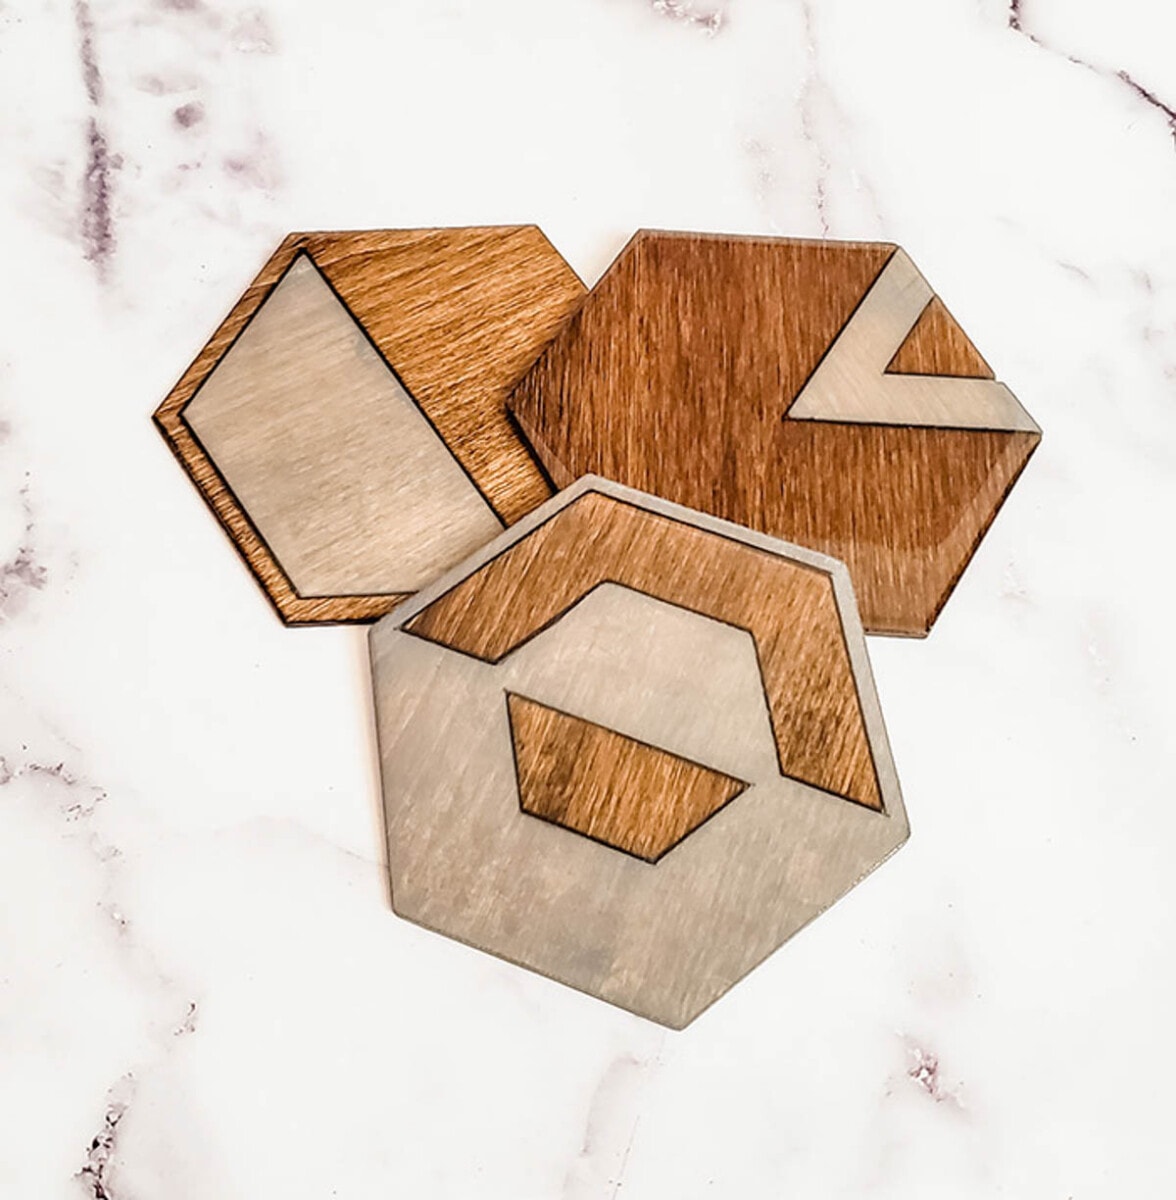 Wooden geometric coasters made with Cricut